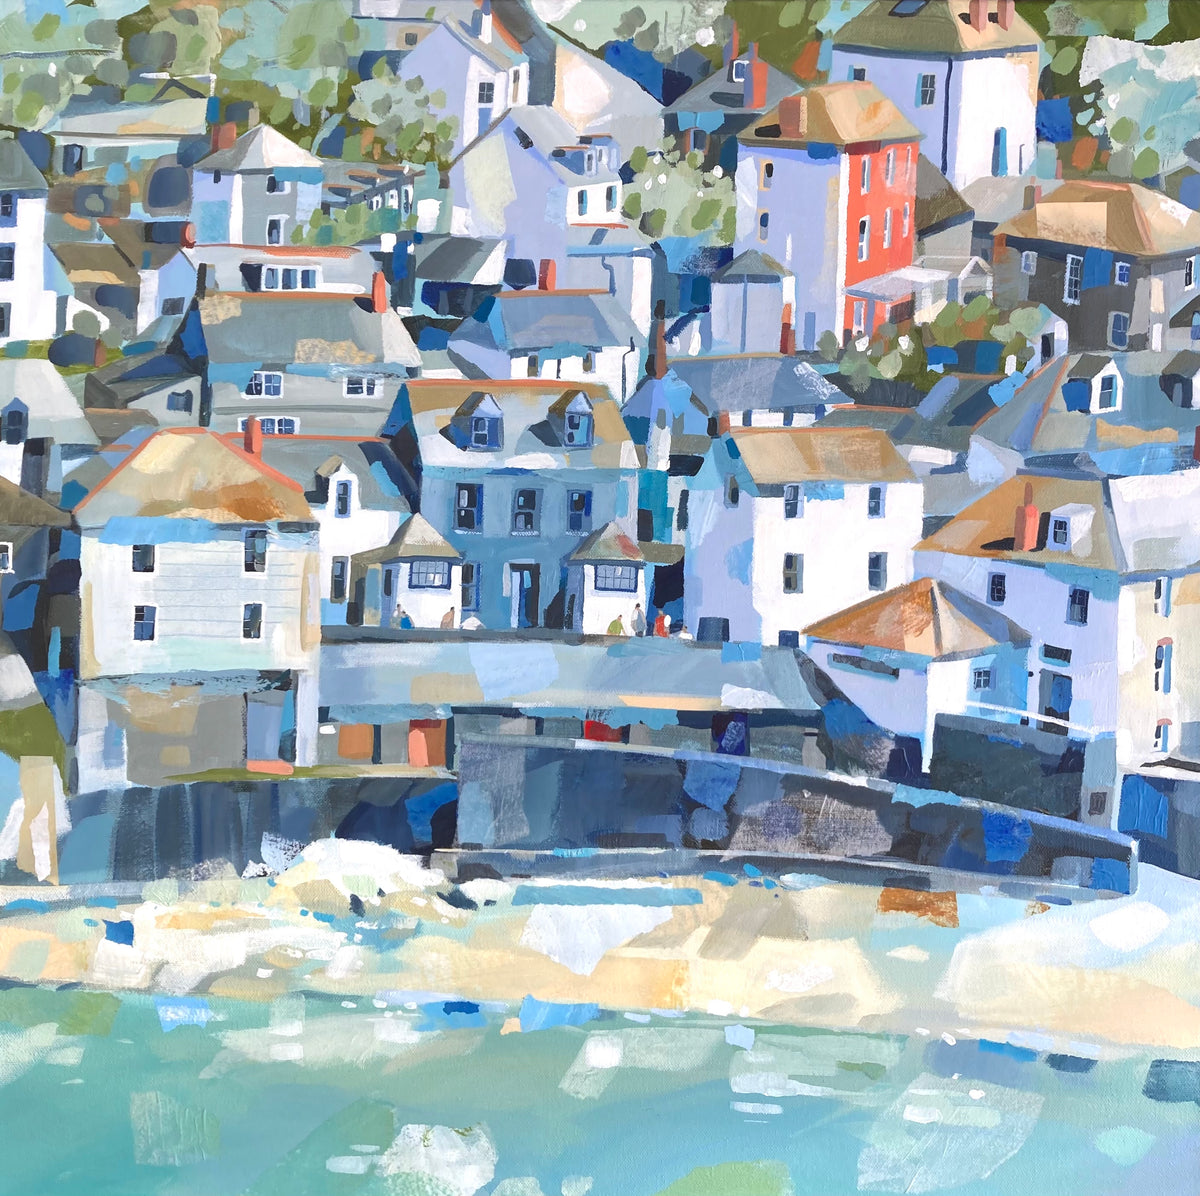 &#39;Port Isaac on a Bright Day&#39; a mixed media original by Claire Henley, available at Padstow Gallery, Cornwall